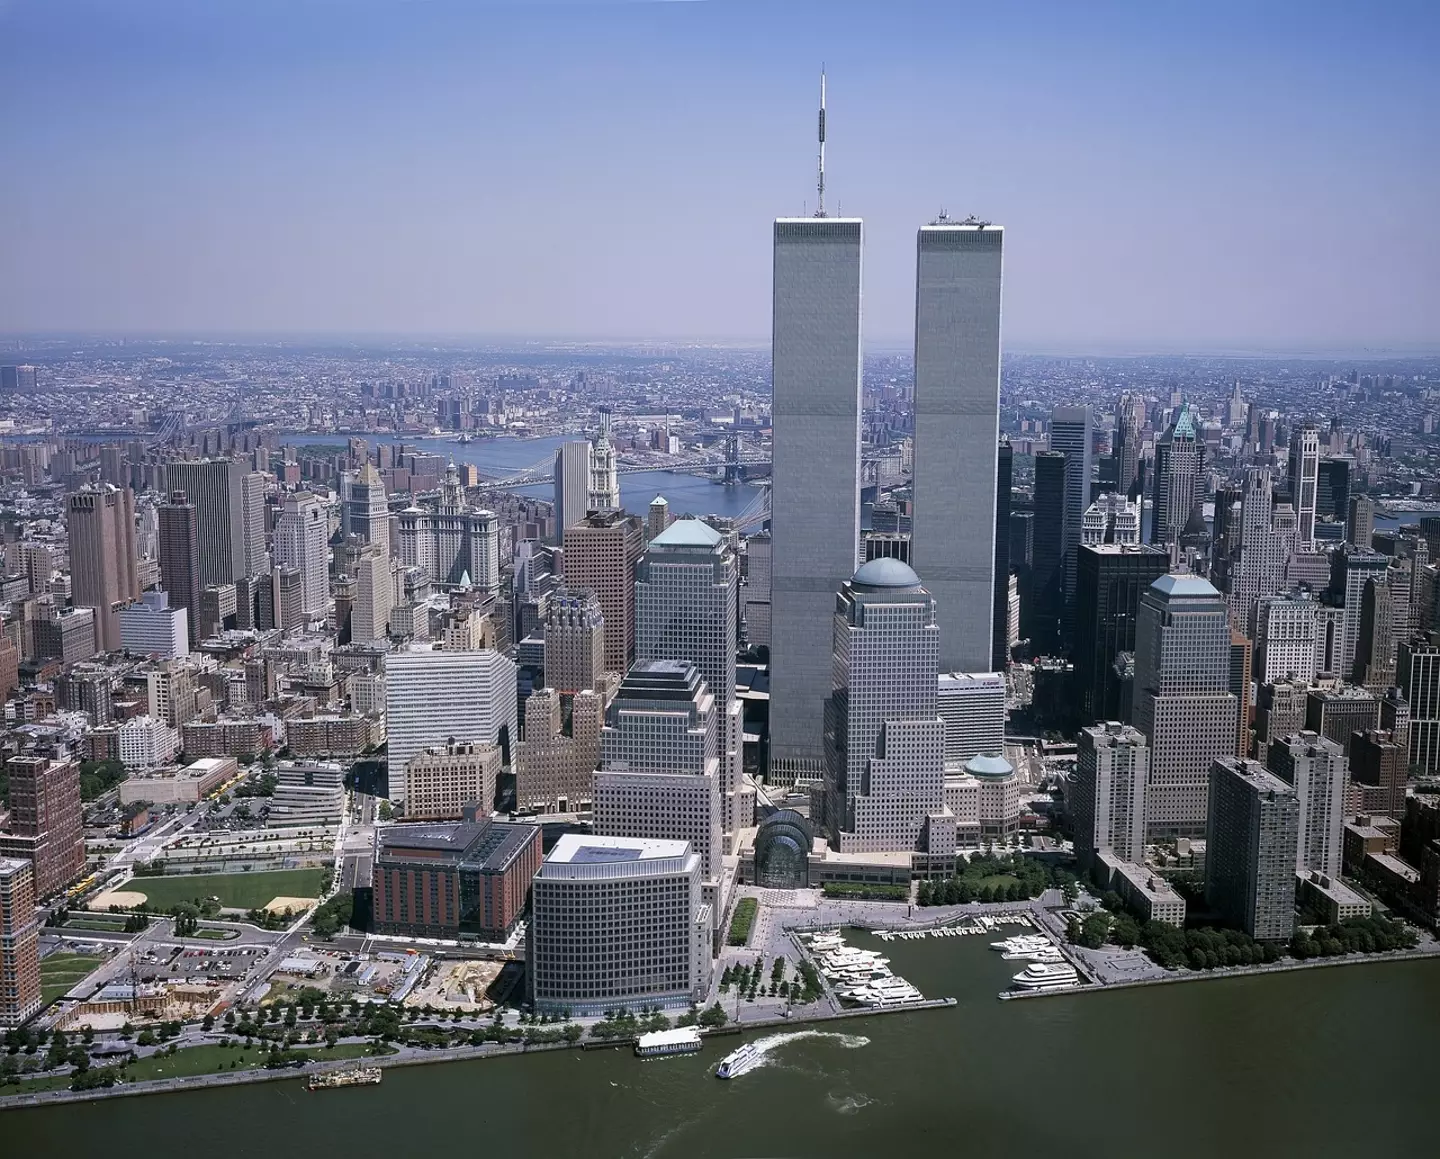 The Twin Towers were destroyed on 11 September, 2001.